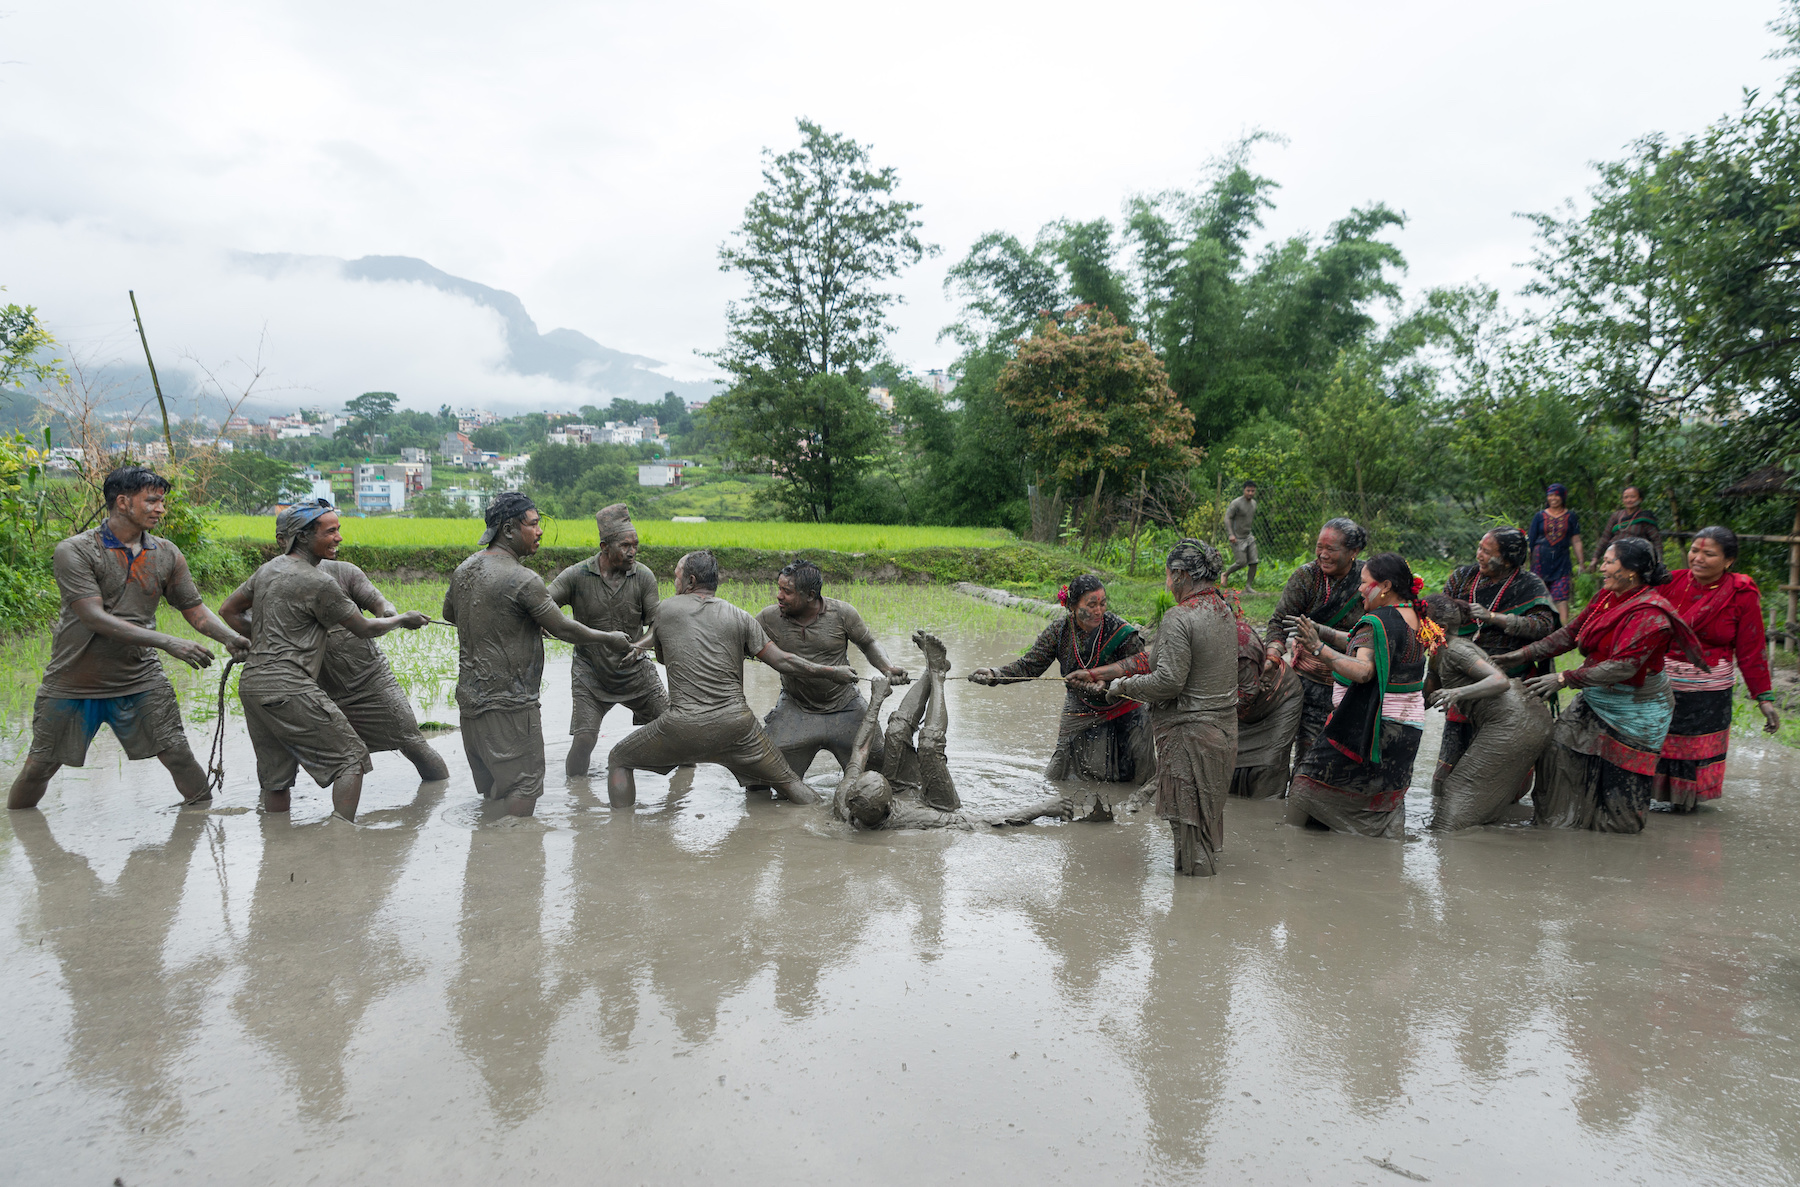 Farmers play a tug-of-war game in a paddy field. On one side we have the men and on the other we have the women's team.